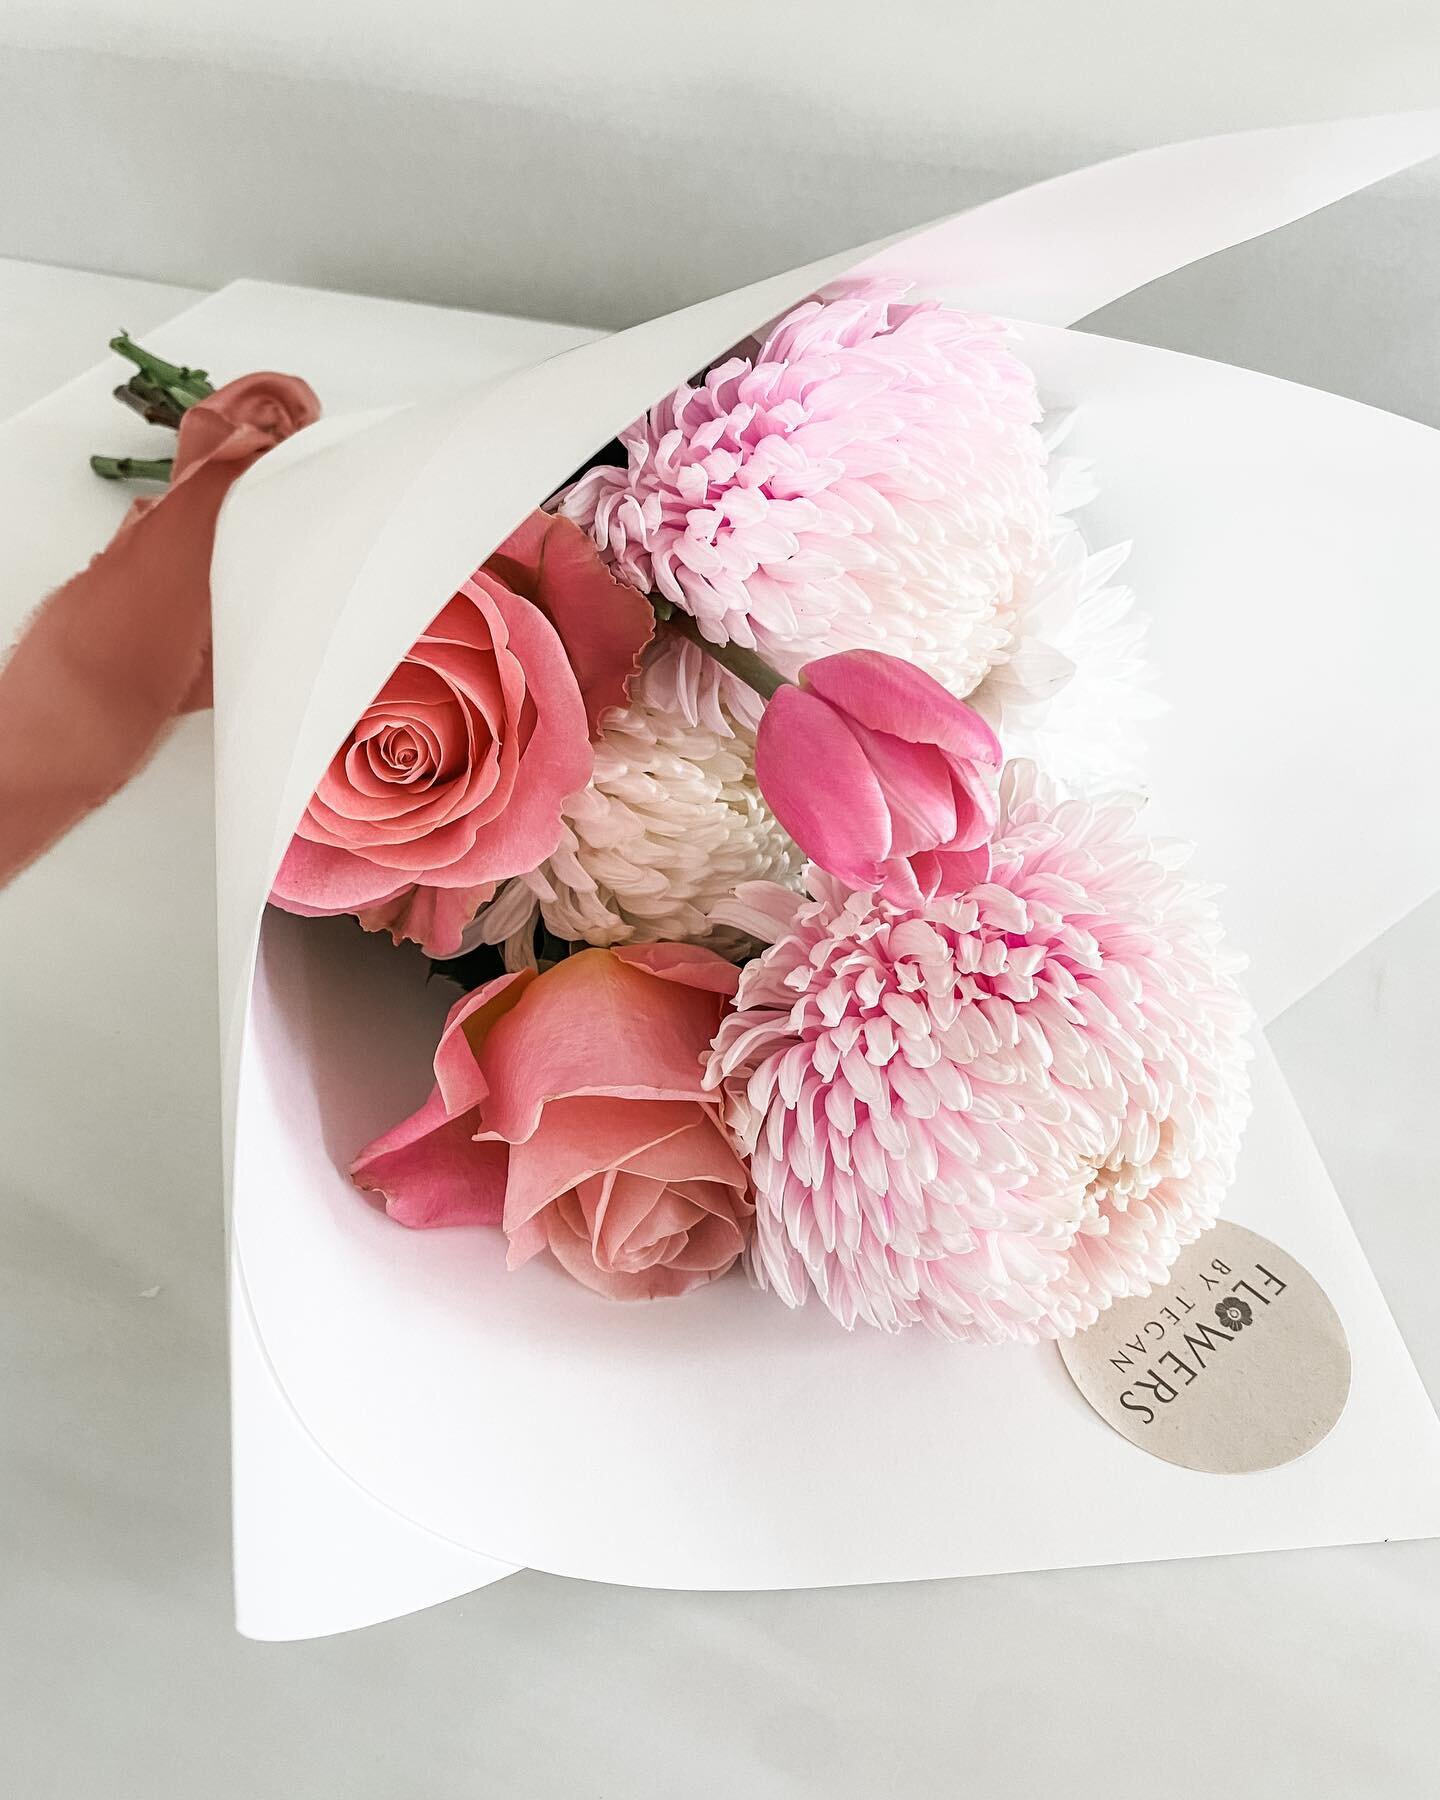 A belated Happy Mother&rsquo;s Day to all the beautiful Mummas! 

I have finally had time to sit down and relax after a busy few days getting all your Mother&rsquo;s Day orders ready~ a total of 78 flower arrangements created and delivered around ced